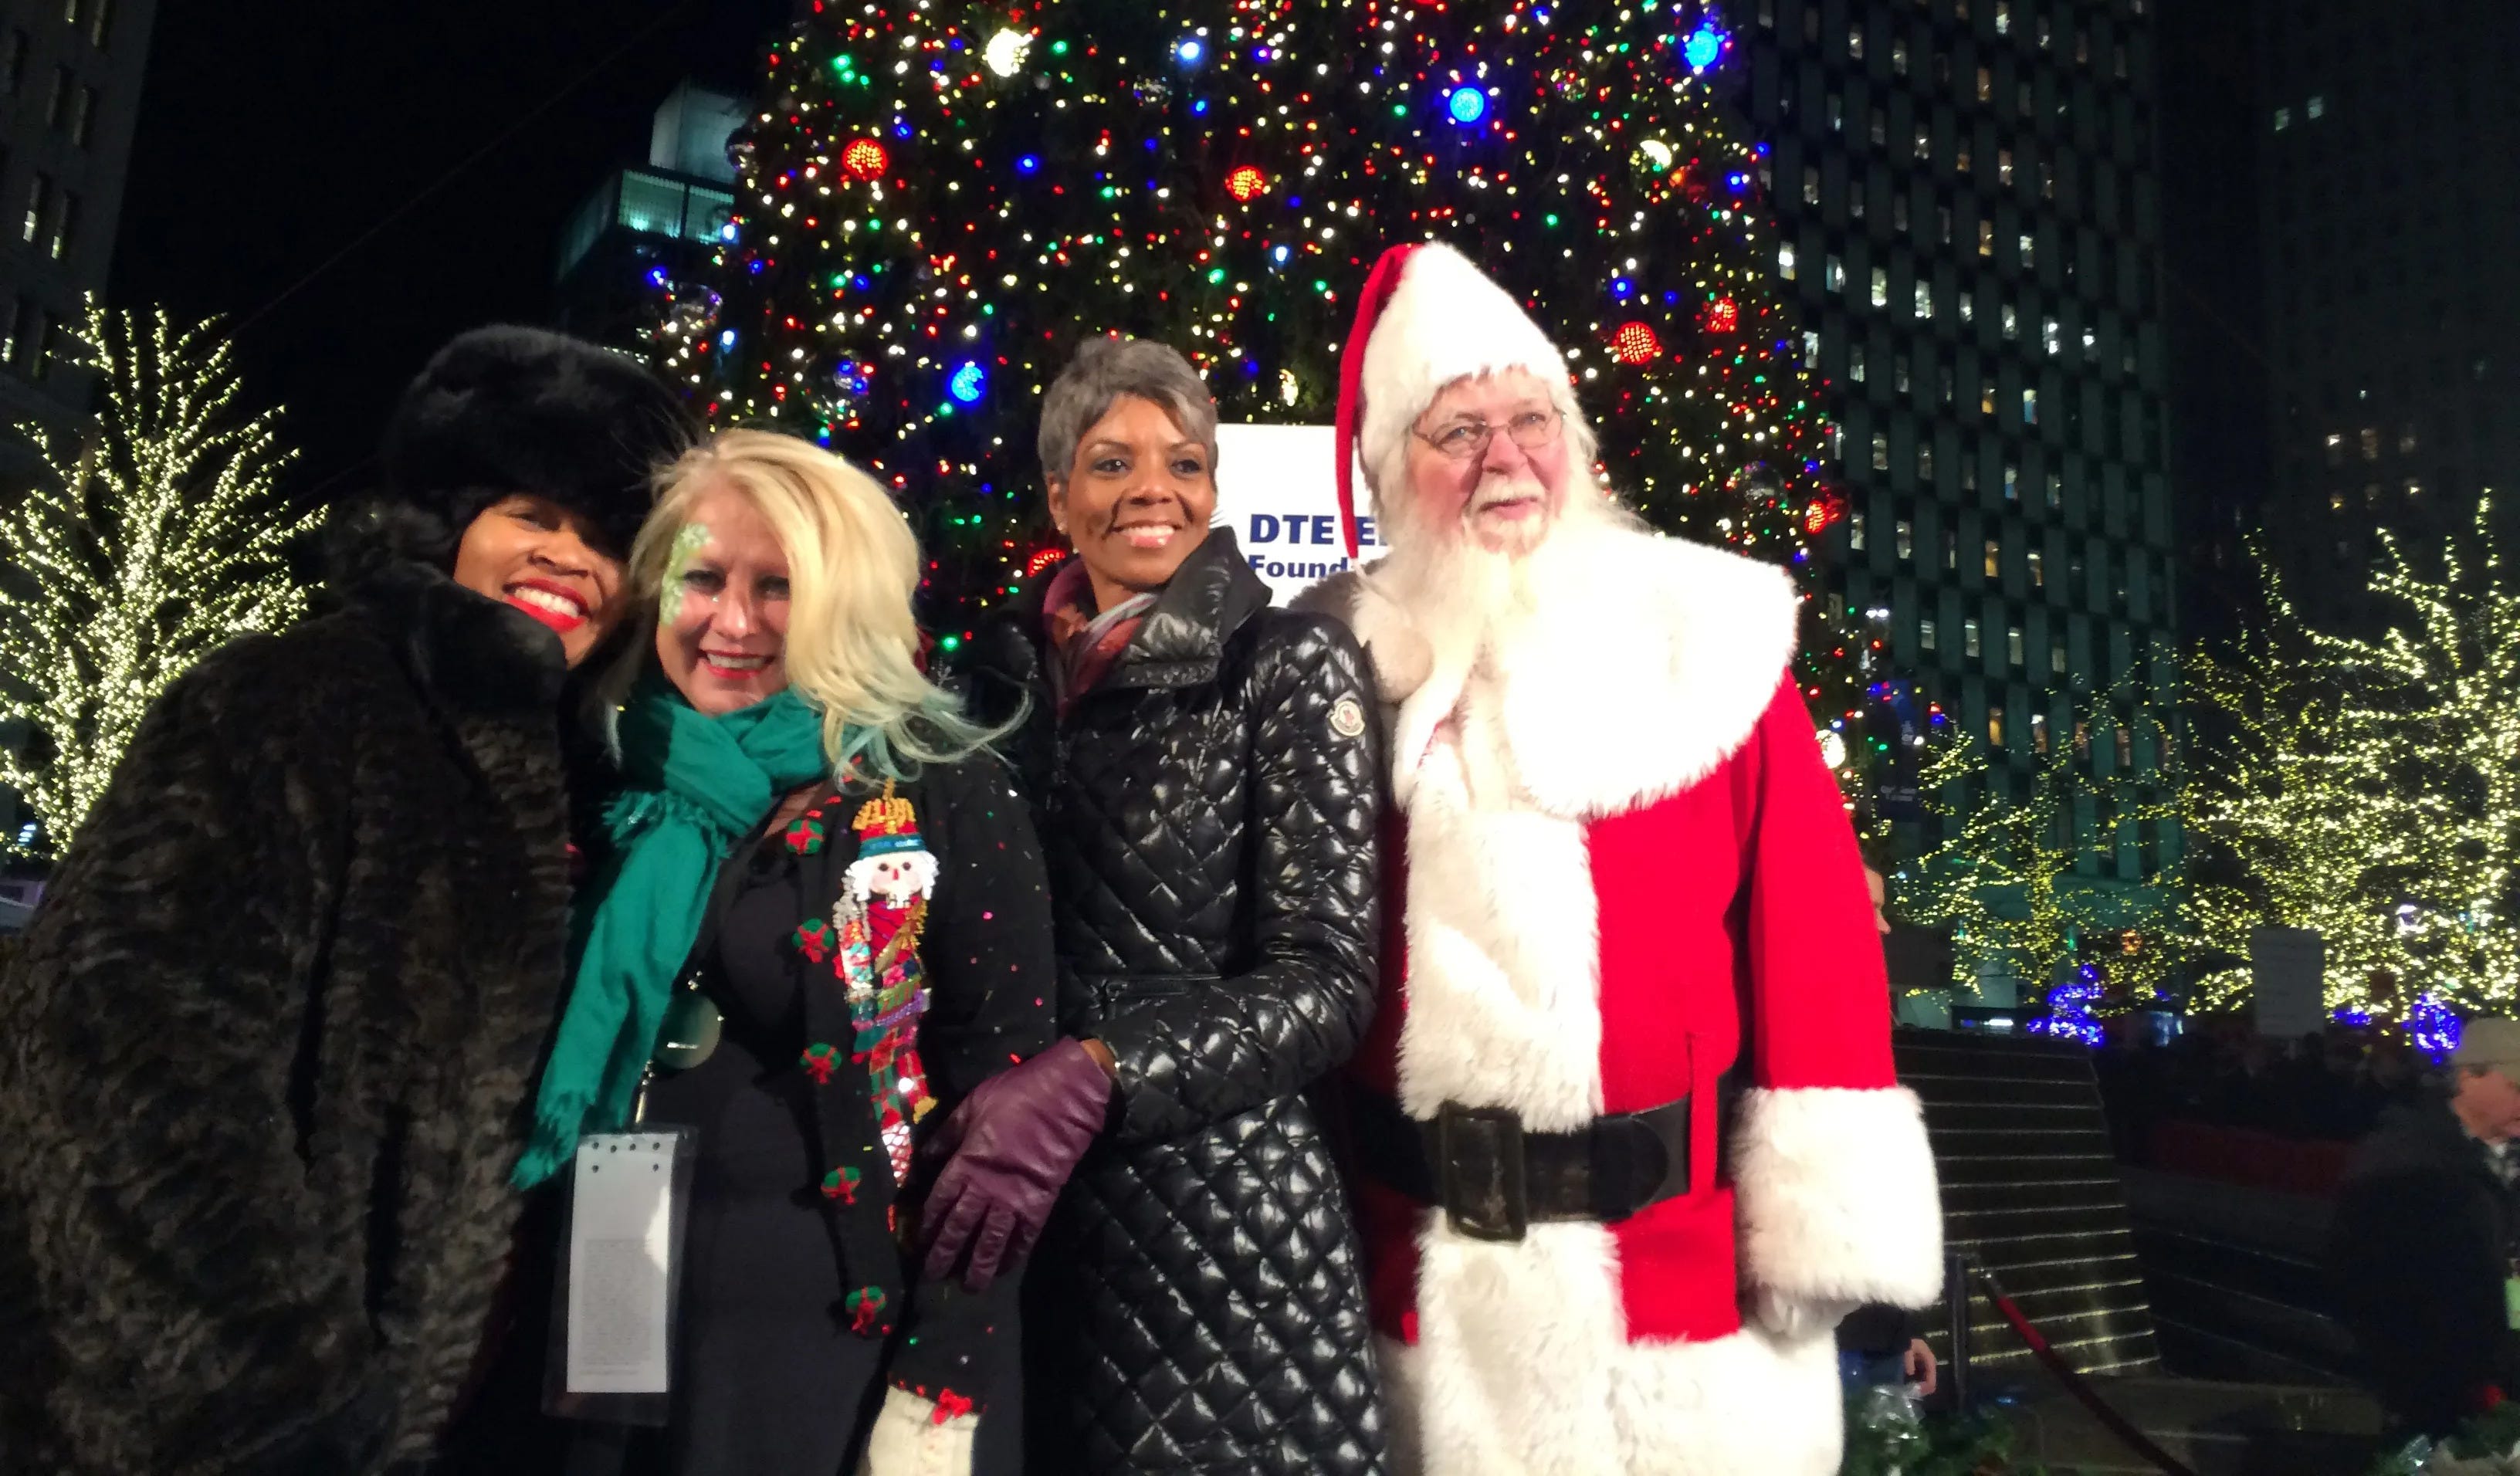 Detroit Councilwoman Brenda Jones, left; Cindy Pasky, CEO and president, Strategic Staffing; Faye Nelson, vice president of public affairs for DTE Energy; and Santa pose for a photo after the tree-lighting ceremony..